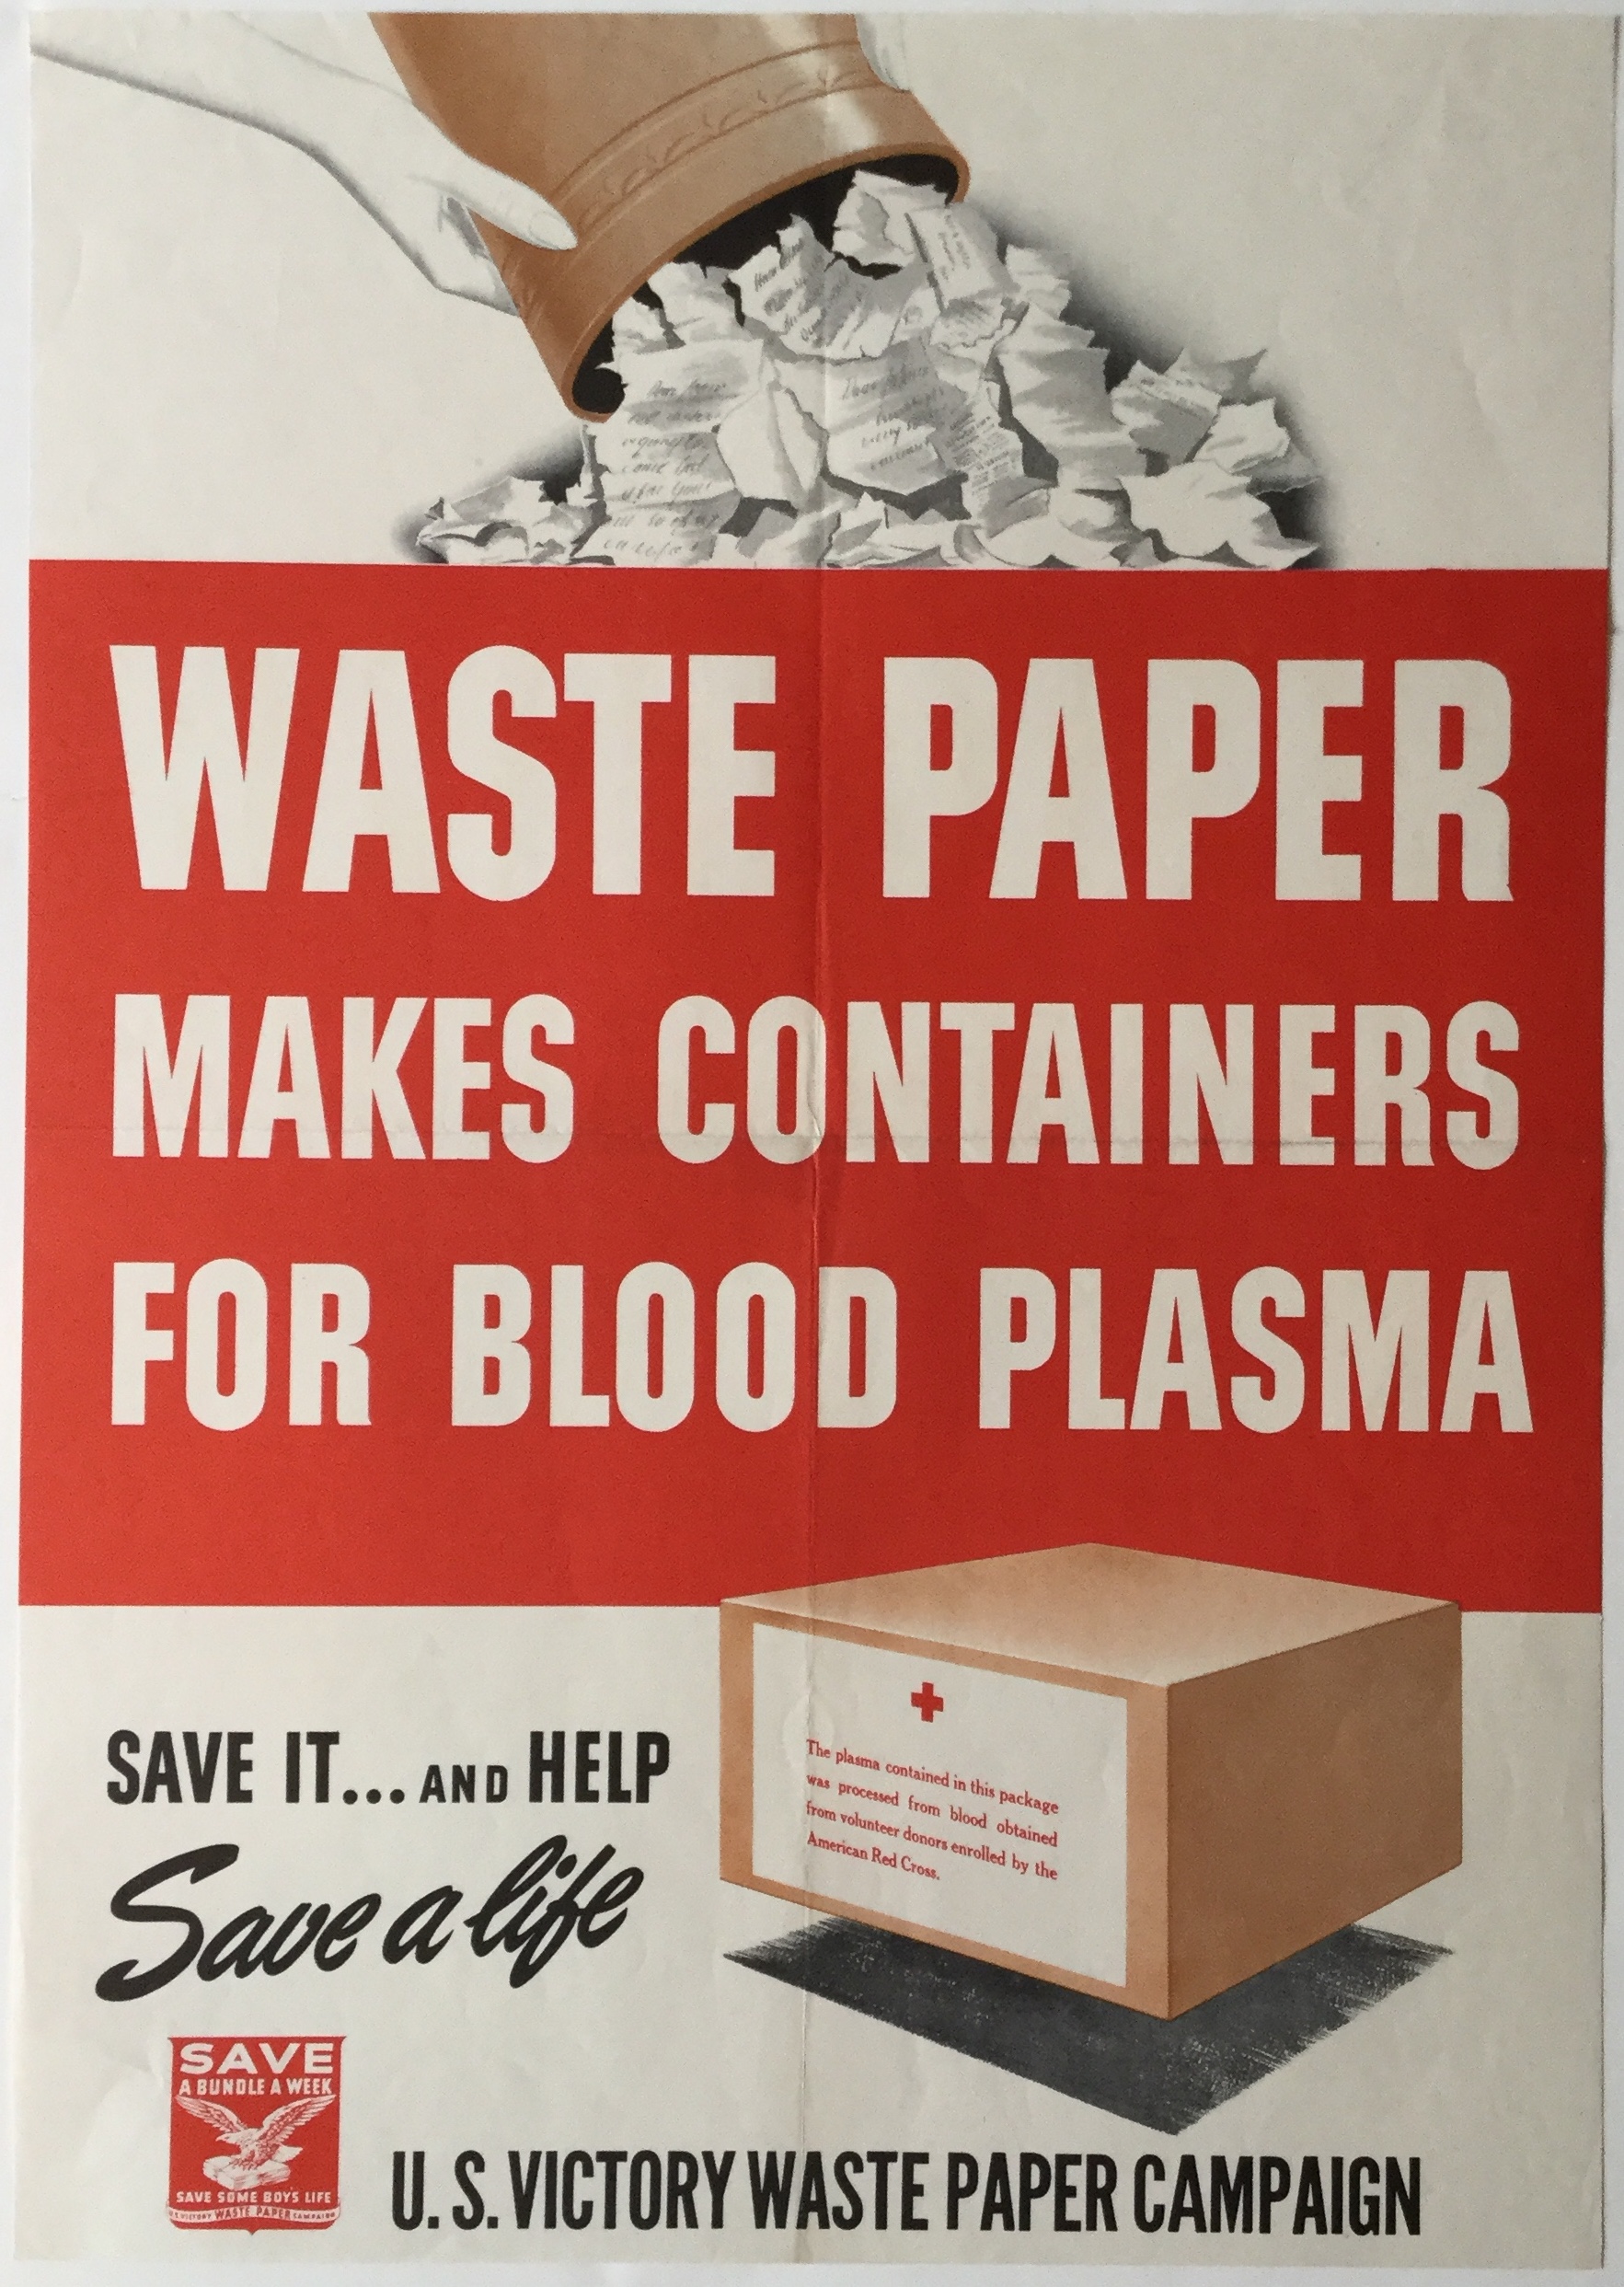 P0605 WASTE PAPER MAKES CONTAINERS FOR BLOOD PLASMA